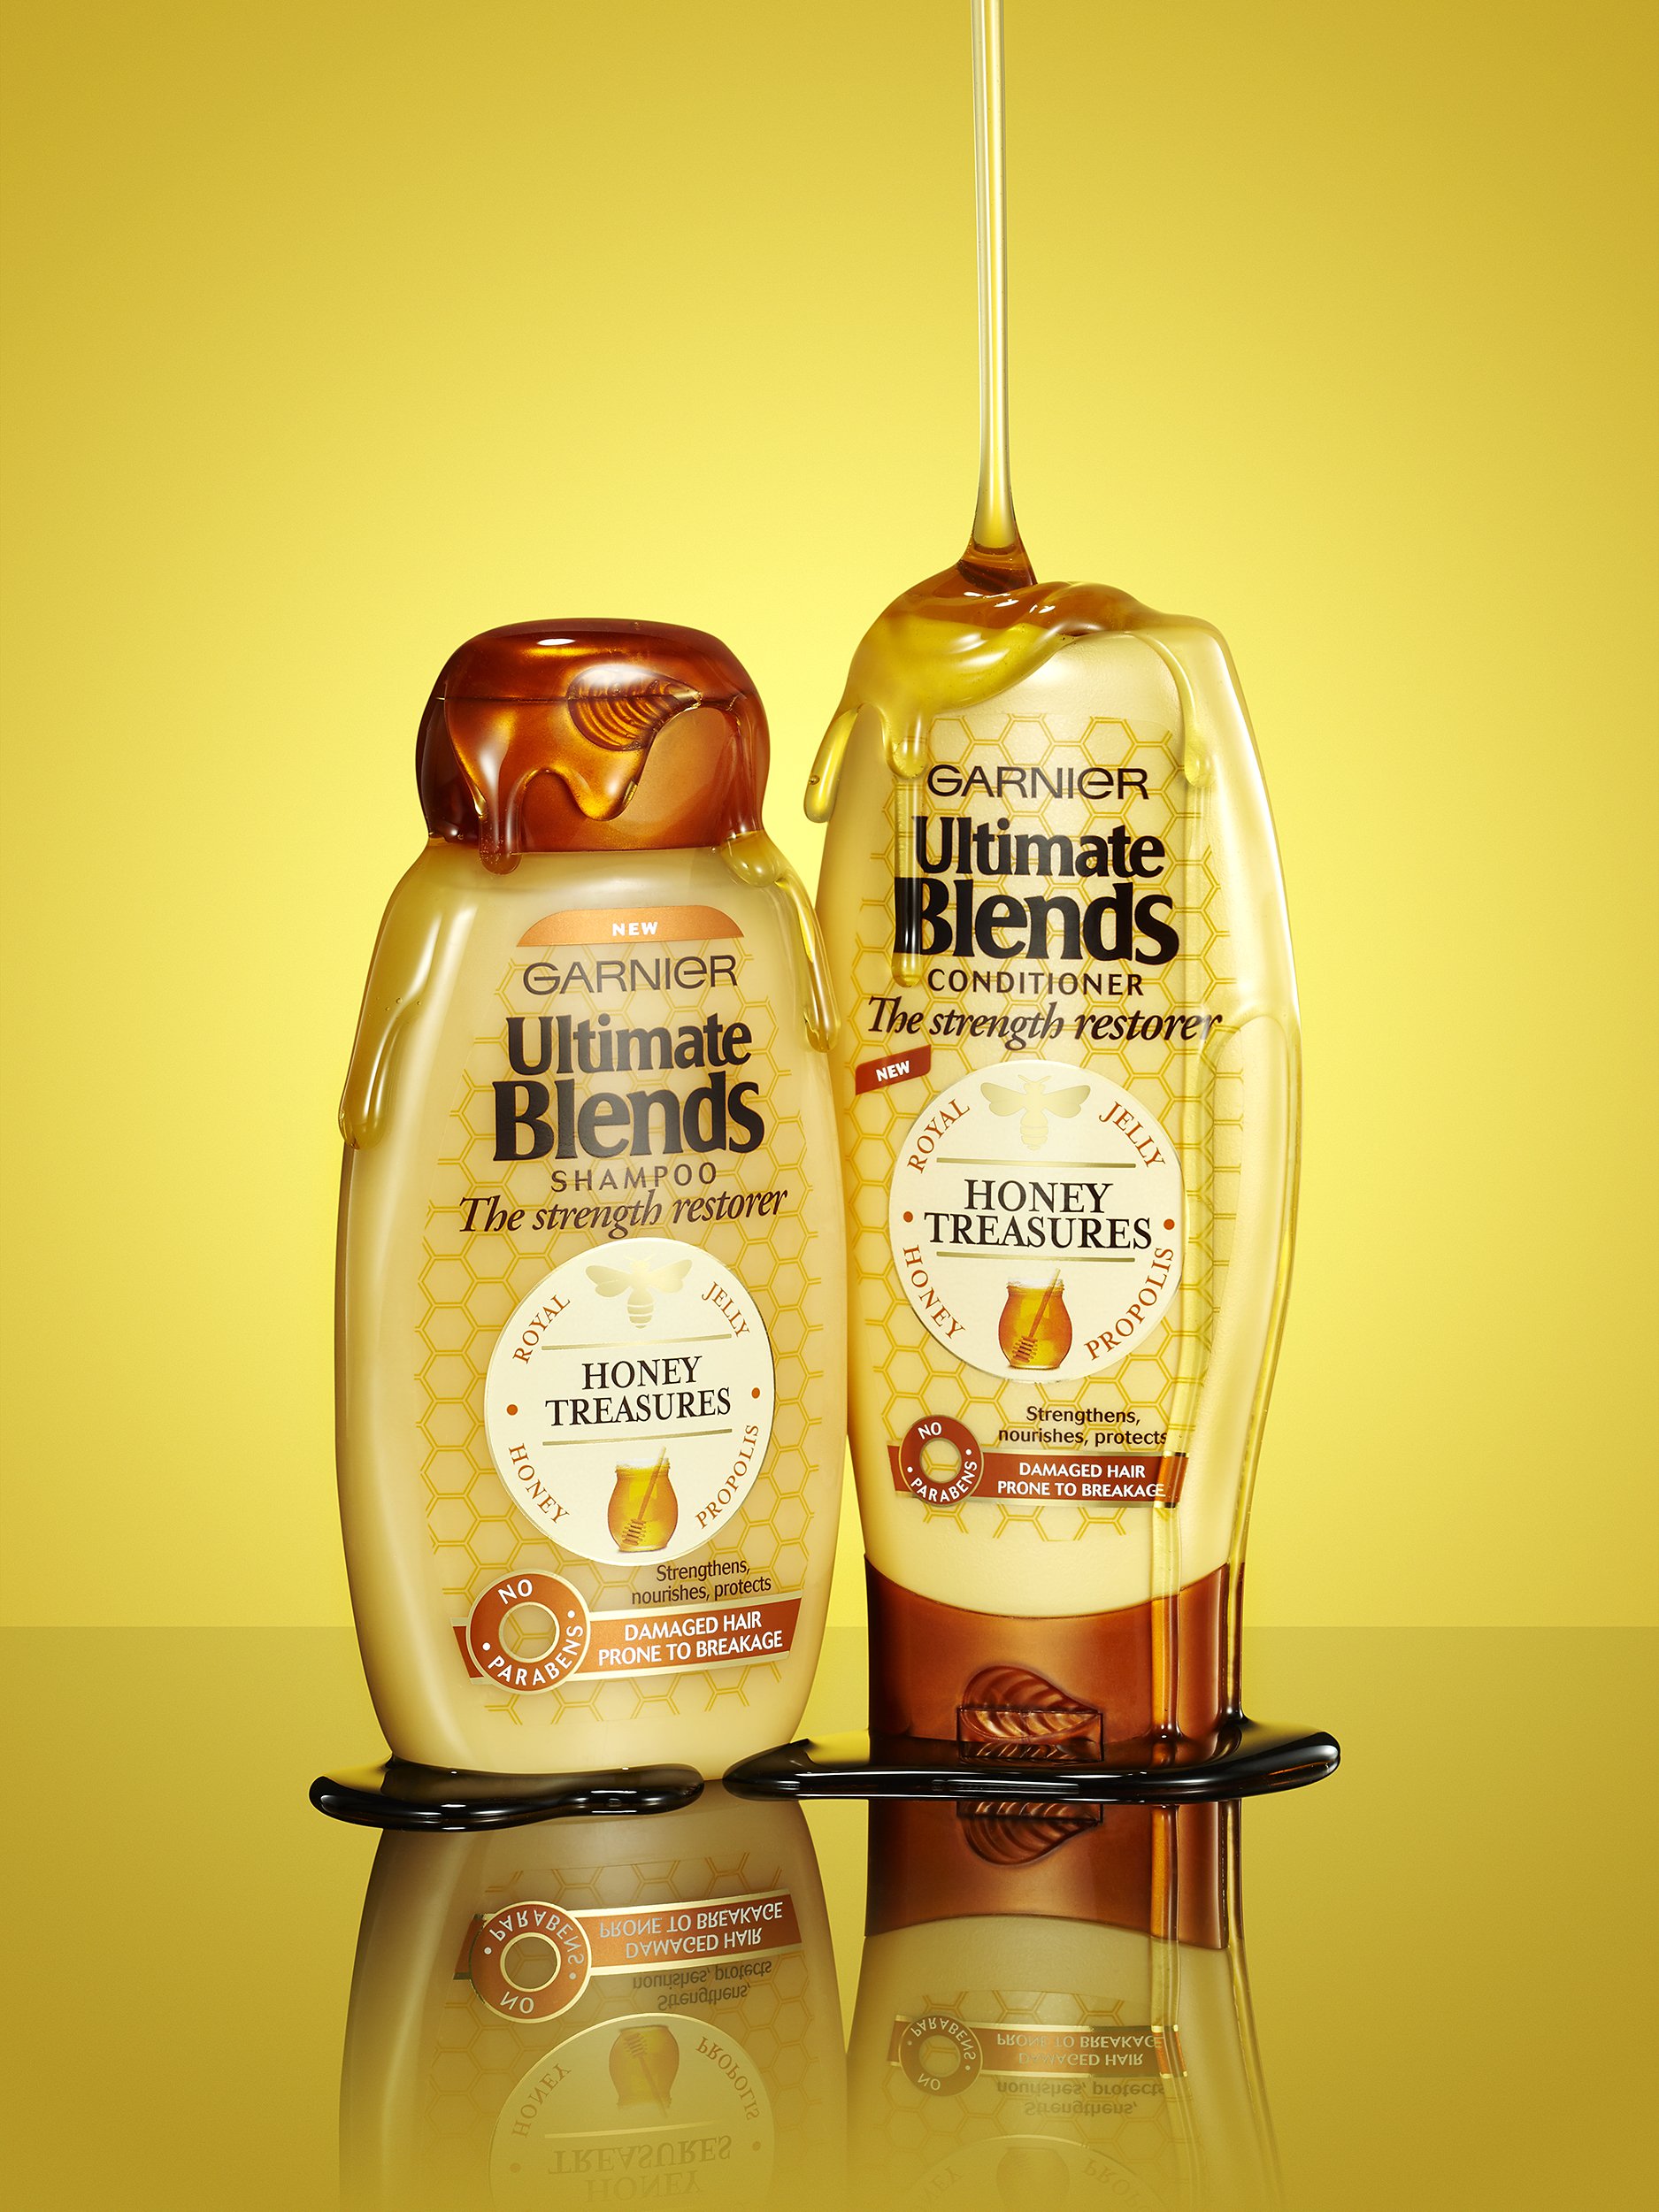 Garnier Ultimate Blends Shampoo &amp; Conditioner - advertising photography from Simon Lyle Ritchie